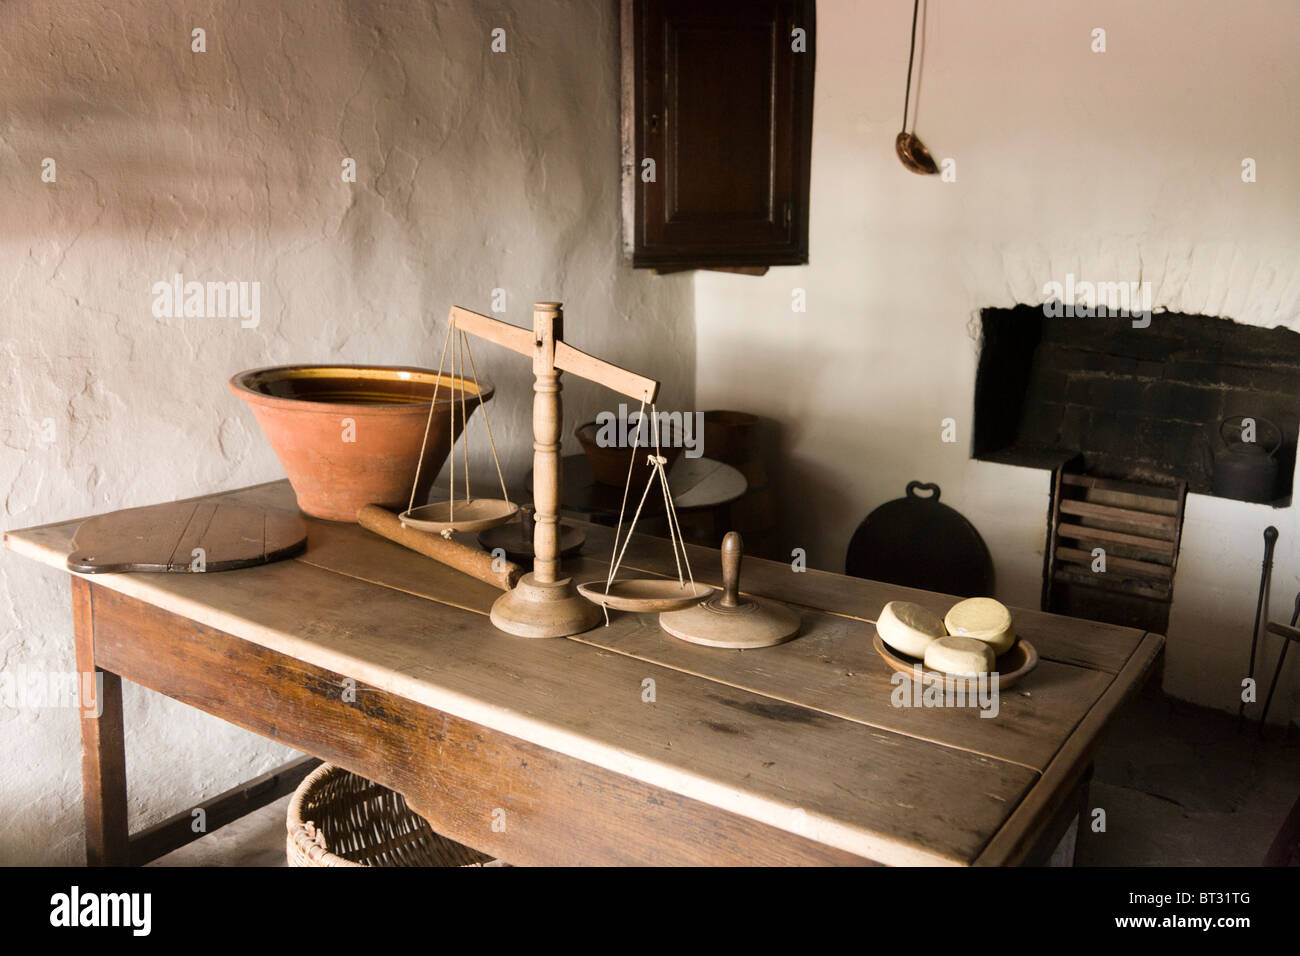 St Fagans Museum of Historical Buildings, Wales. Weighing scales Stock Photo